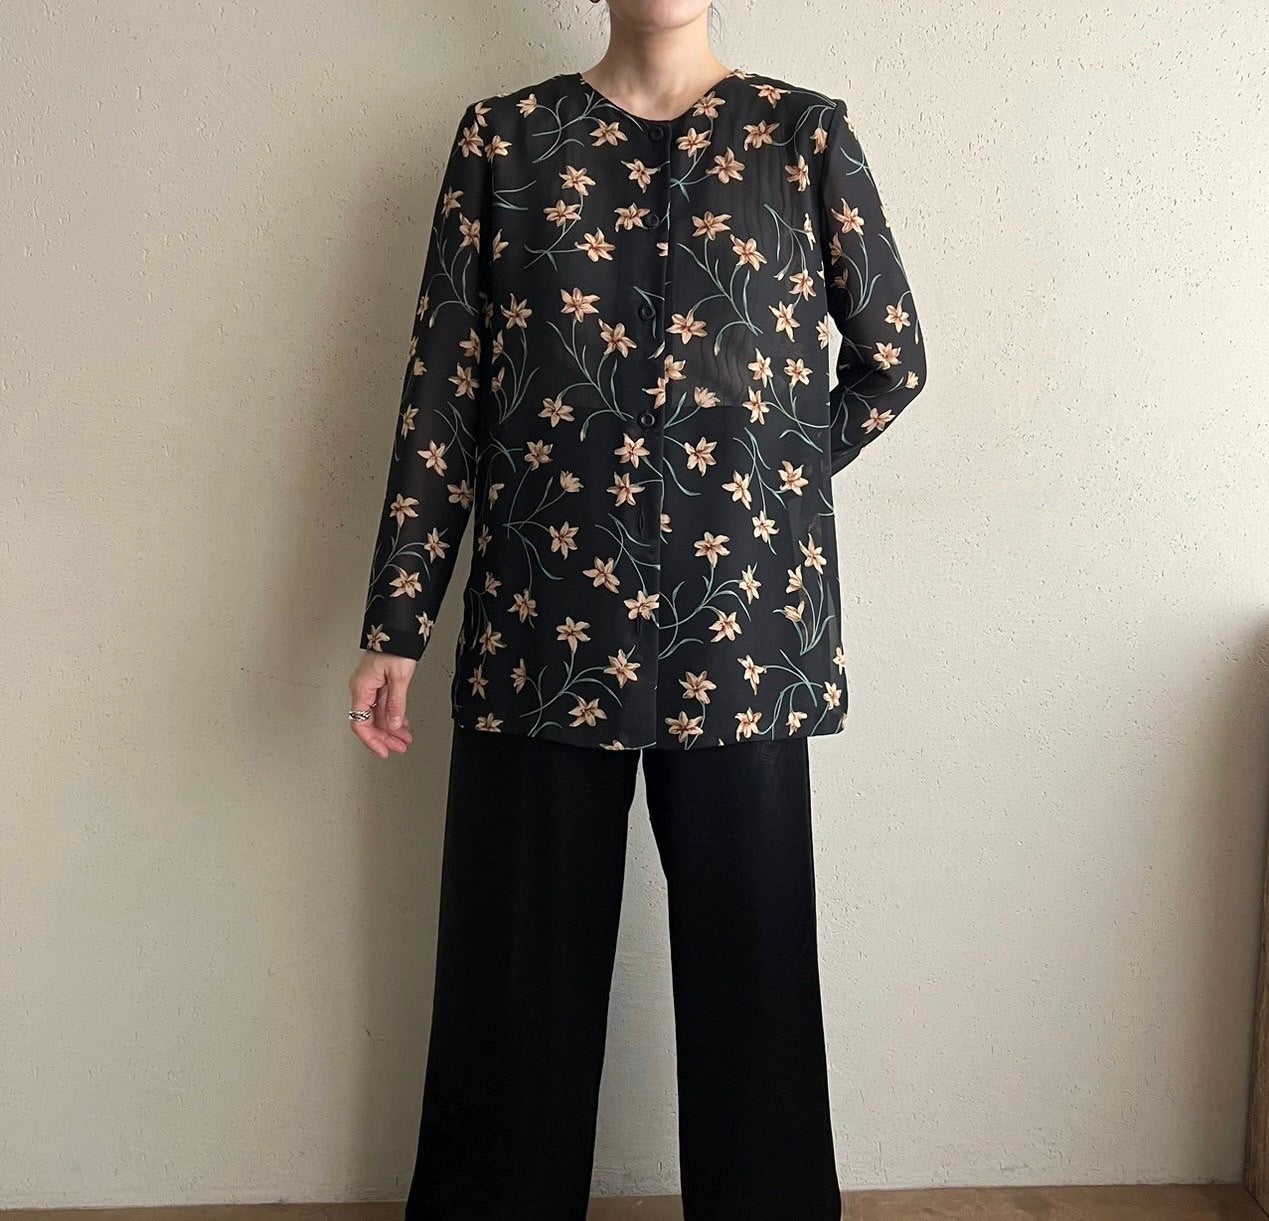 90s Sheer Printed Blouse Made in USA